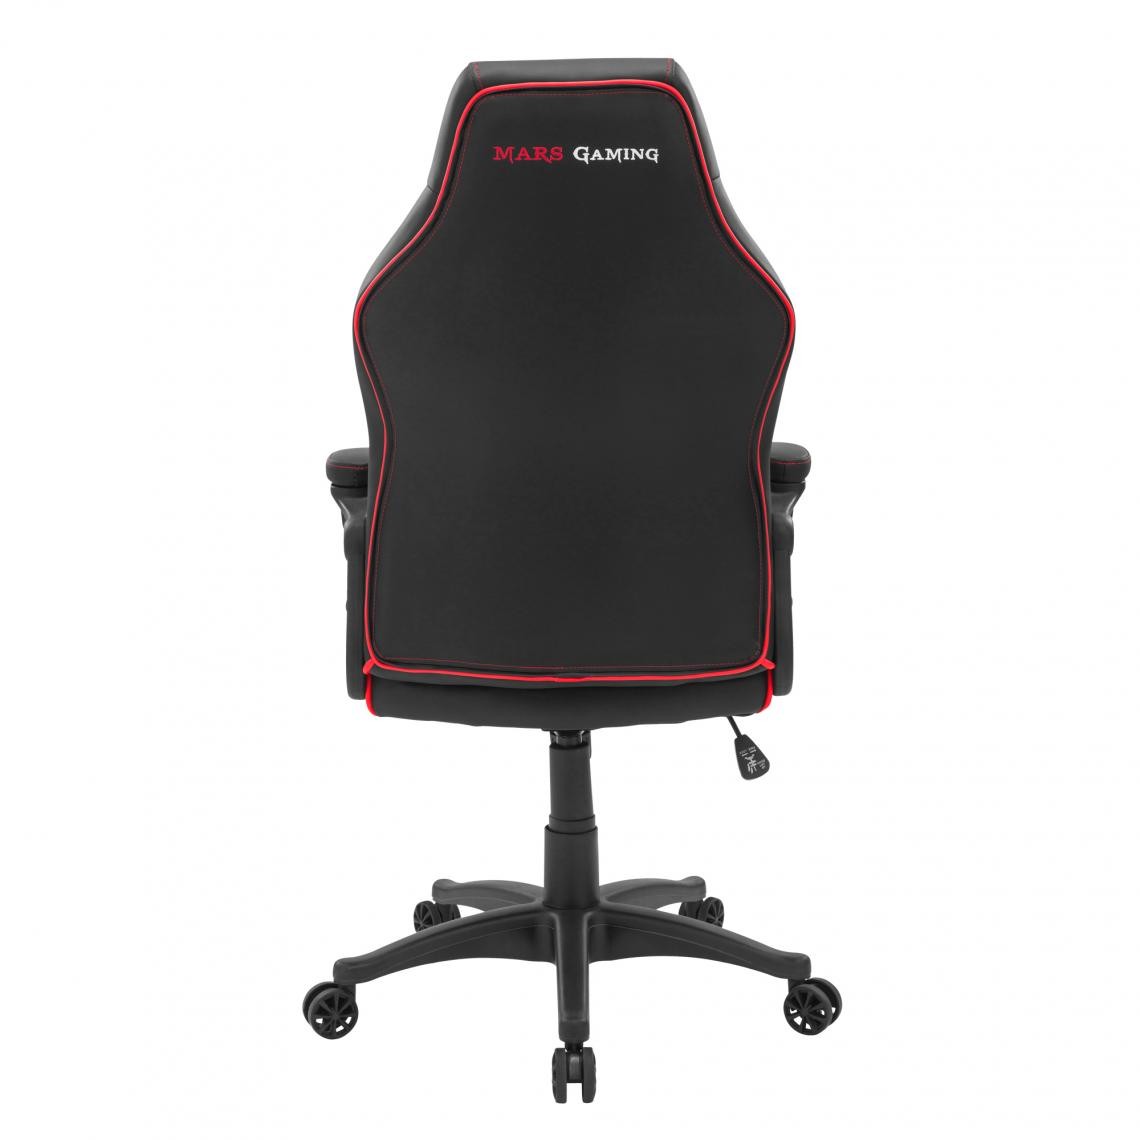 Mars Gaming - Fauteuil MGCX One (Noir/Rouge) - Chaise gamer